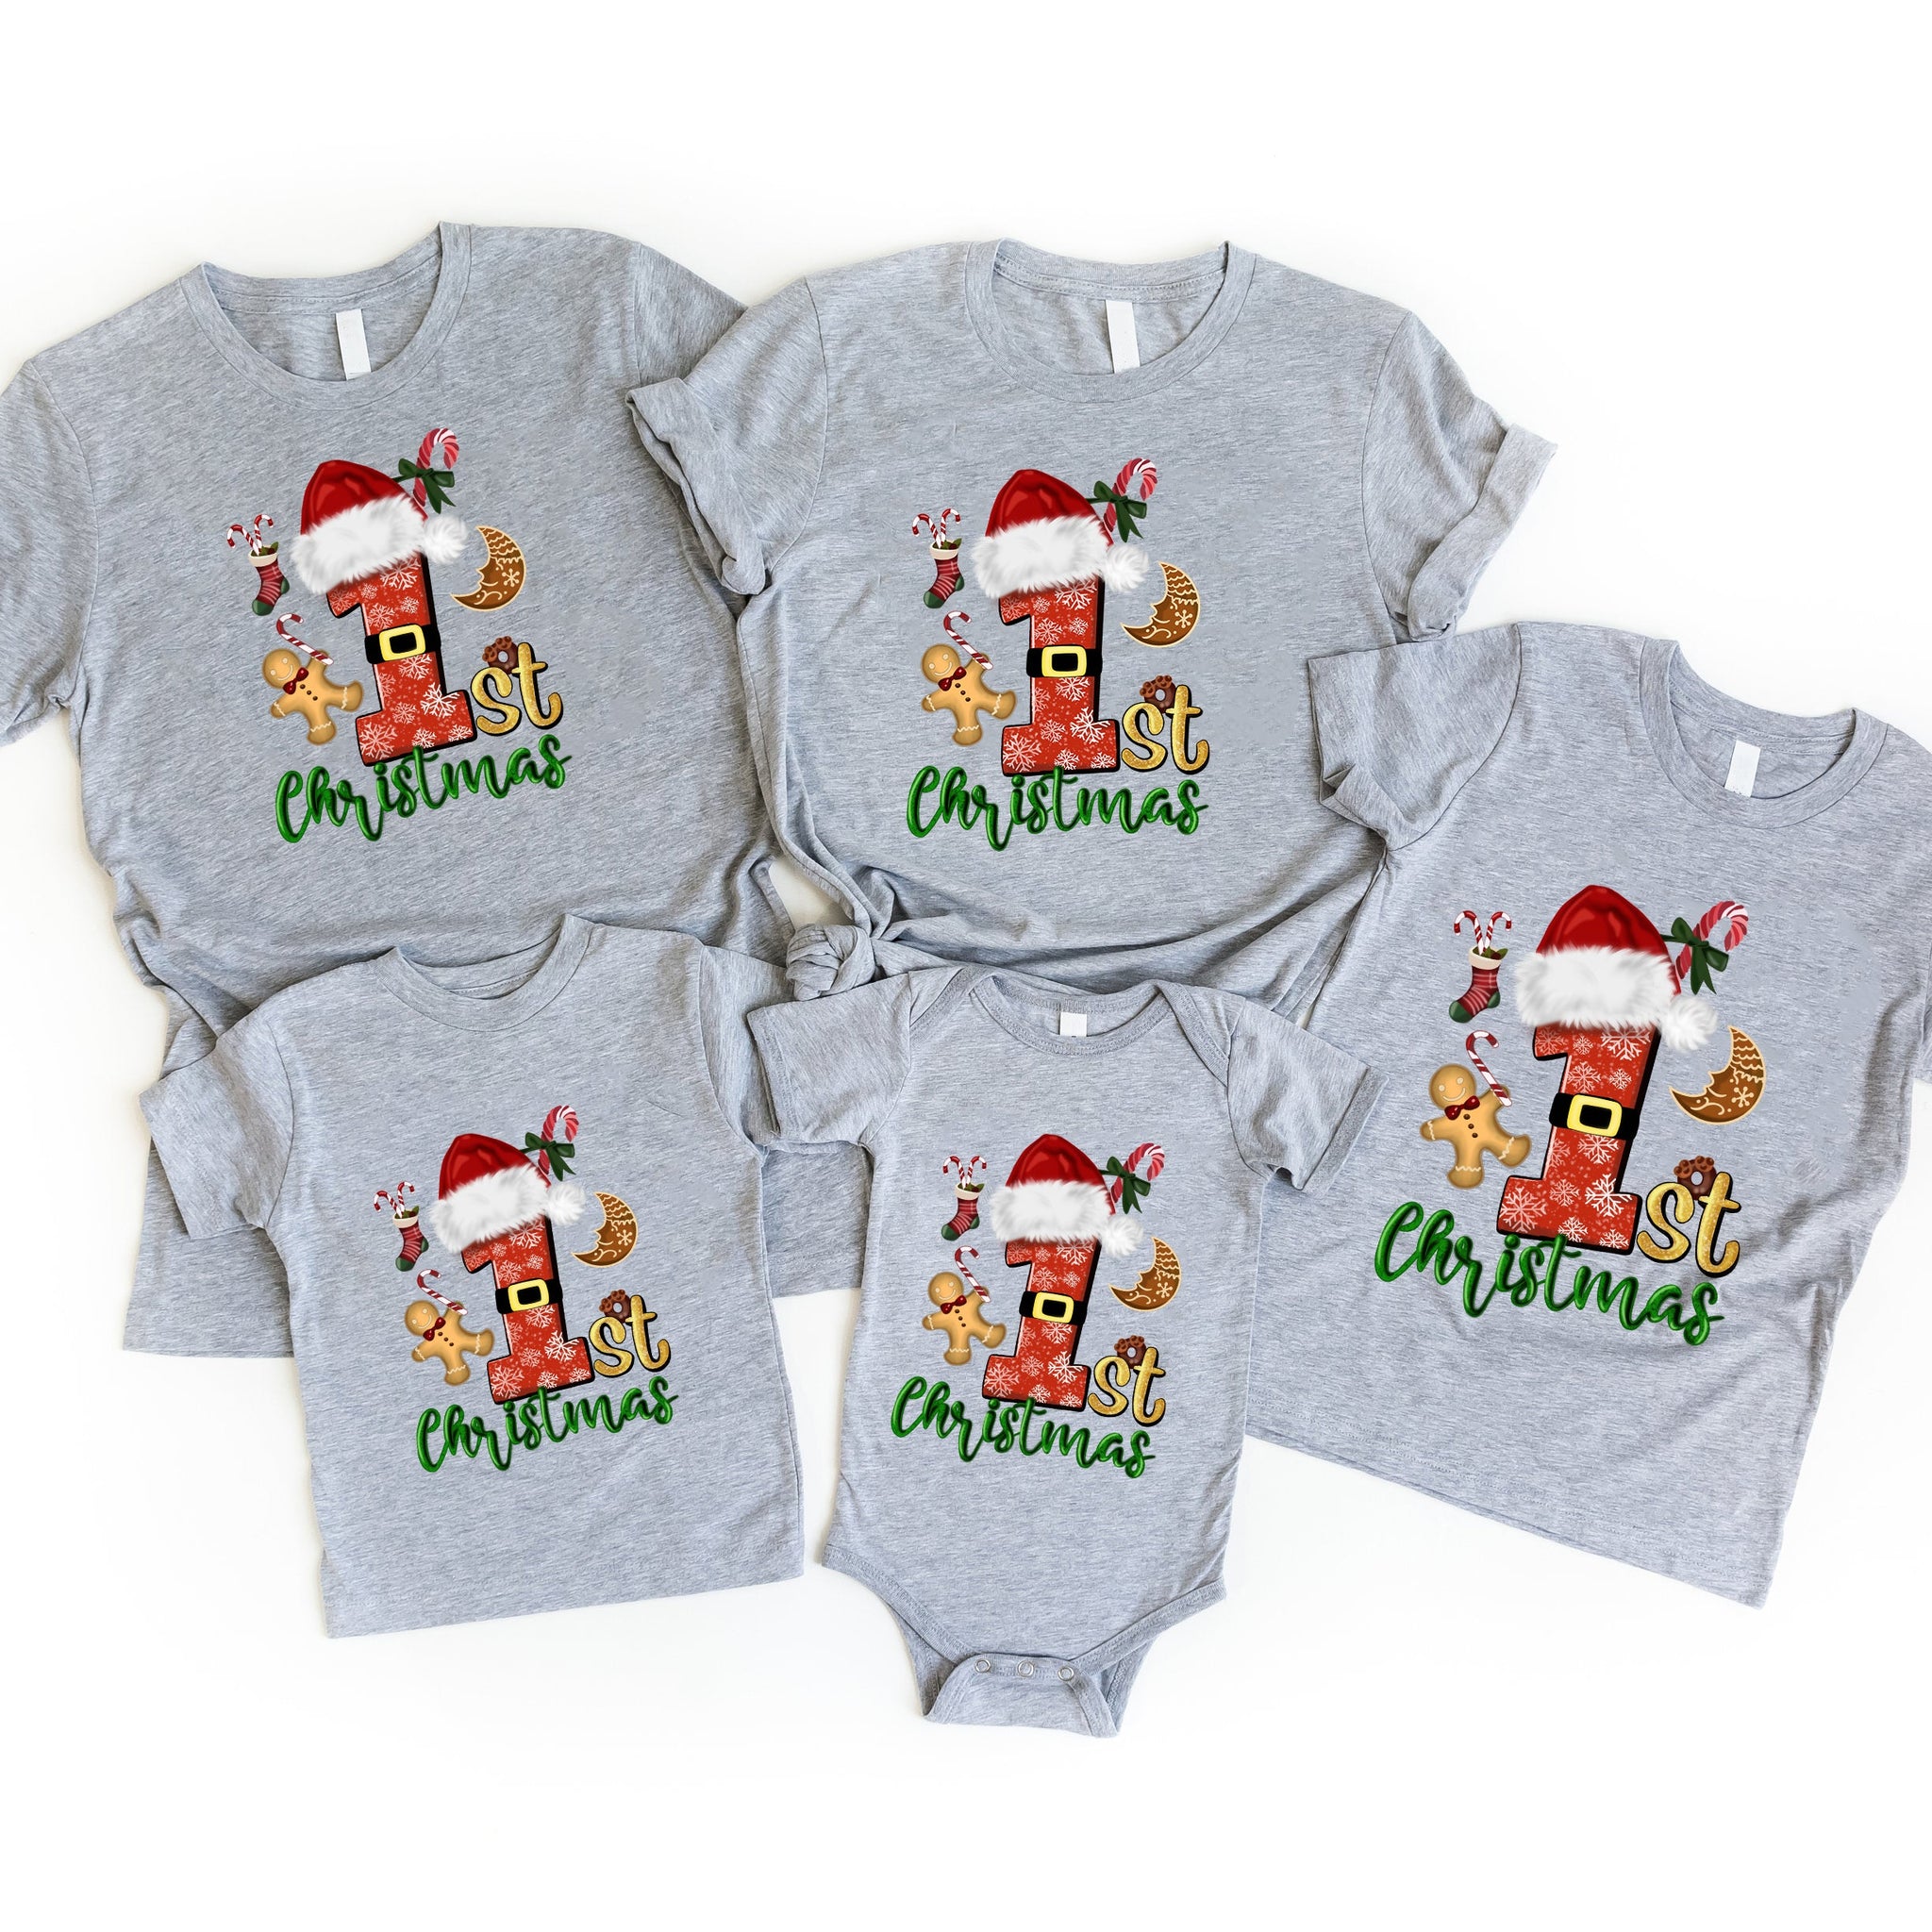 Christmas Elements Patterned and '1st Christmas' Letter Print Patterned Gray Color Casual Short Sleeve T-shirts  Family Matching Tops With Dog Bandana